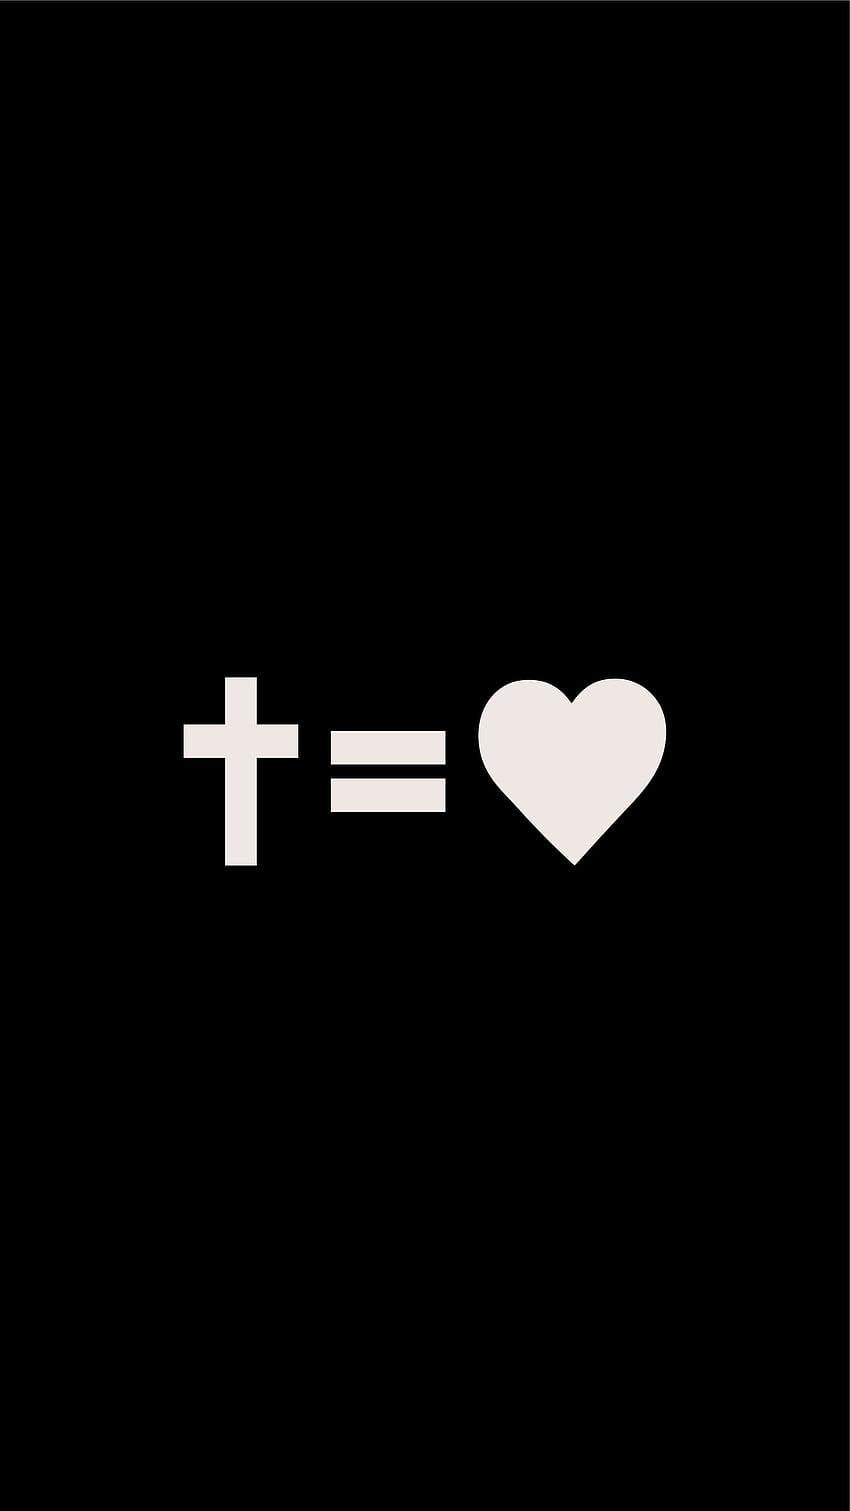 Cross Equals Love - Posters, Invite Cards, Banners, Social Media, Phone & More!, 美的クロス HD電話の壁紙